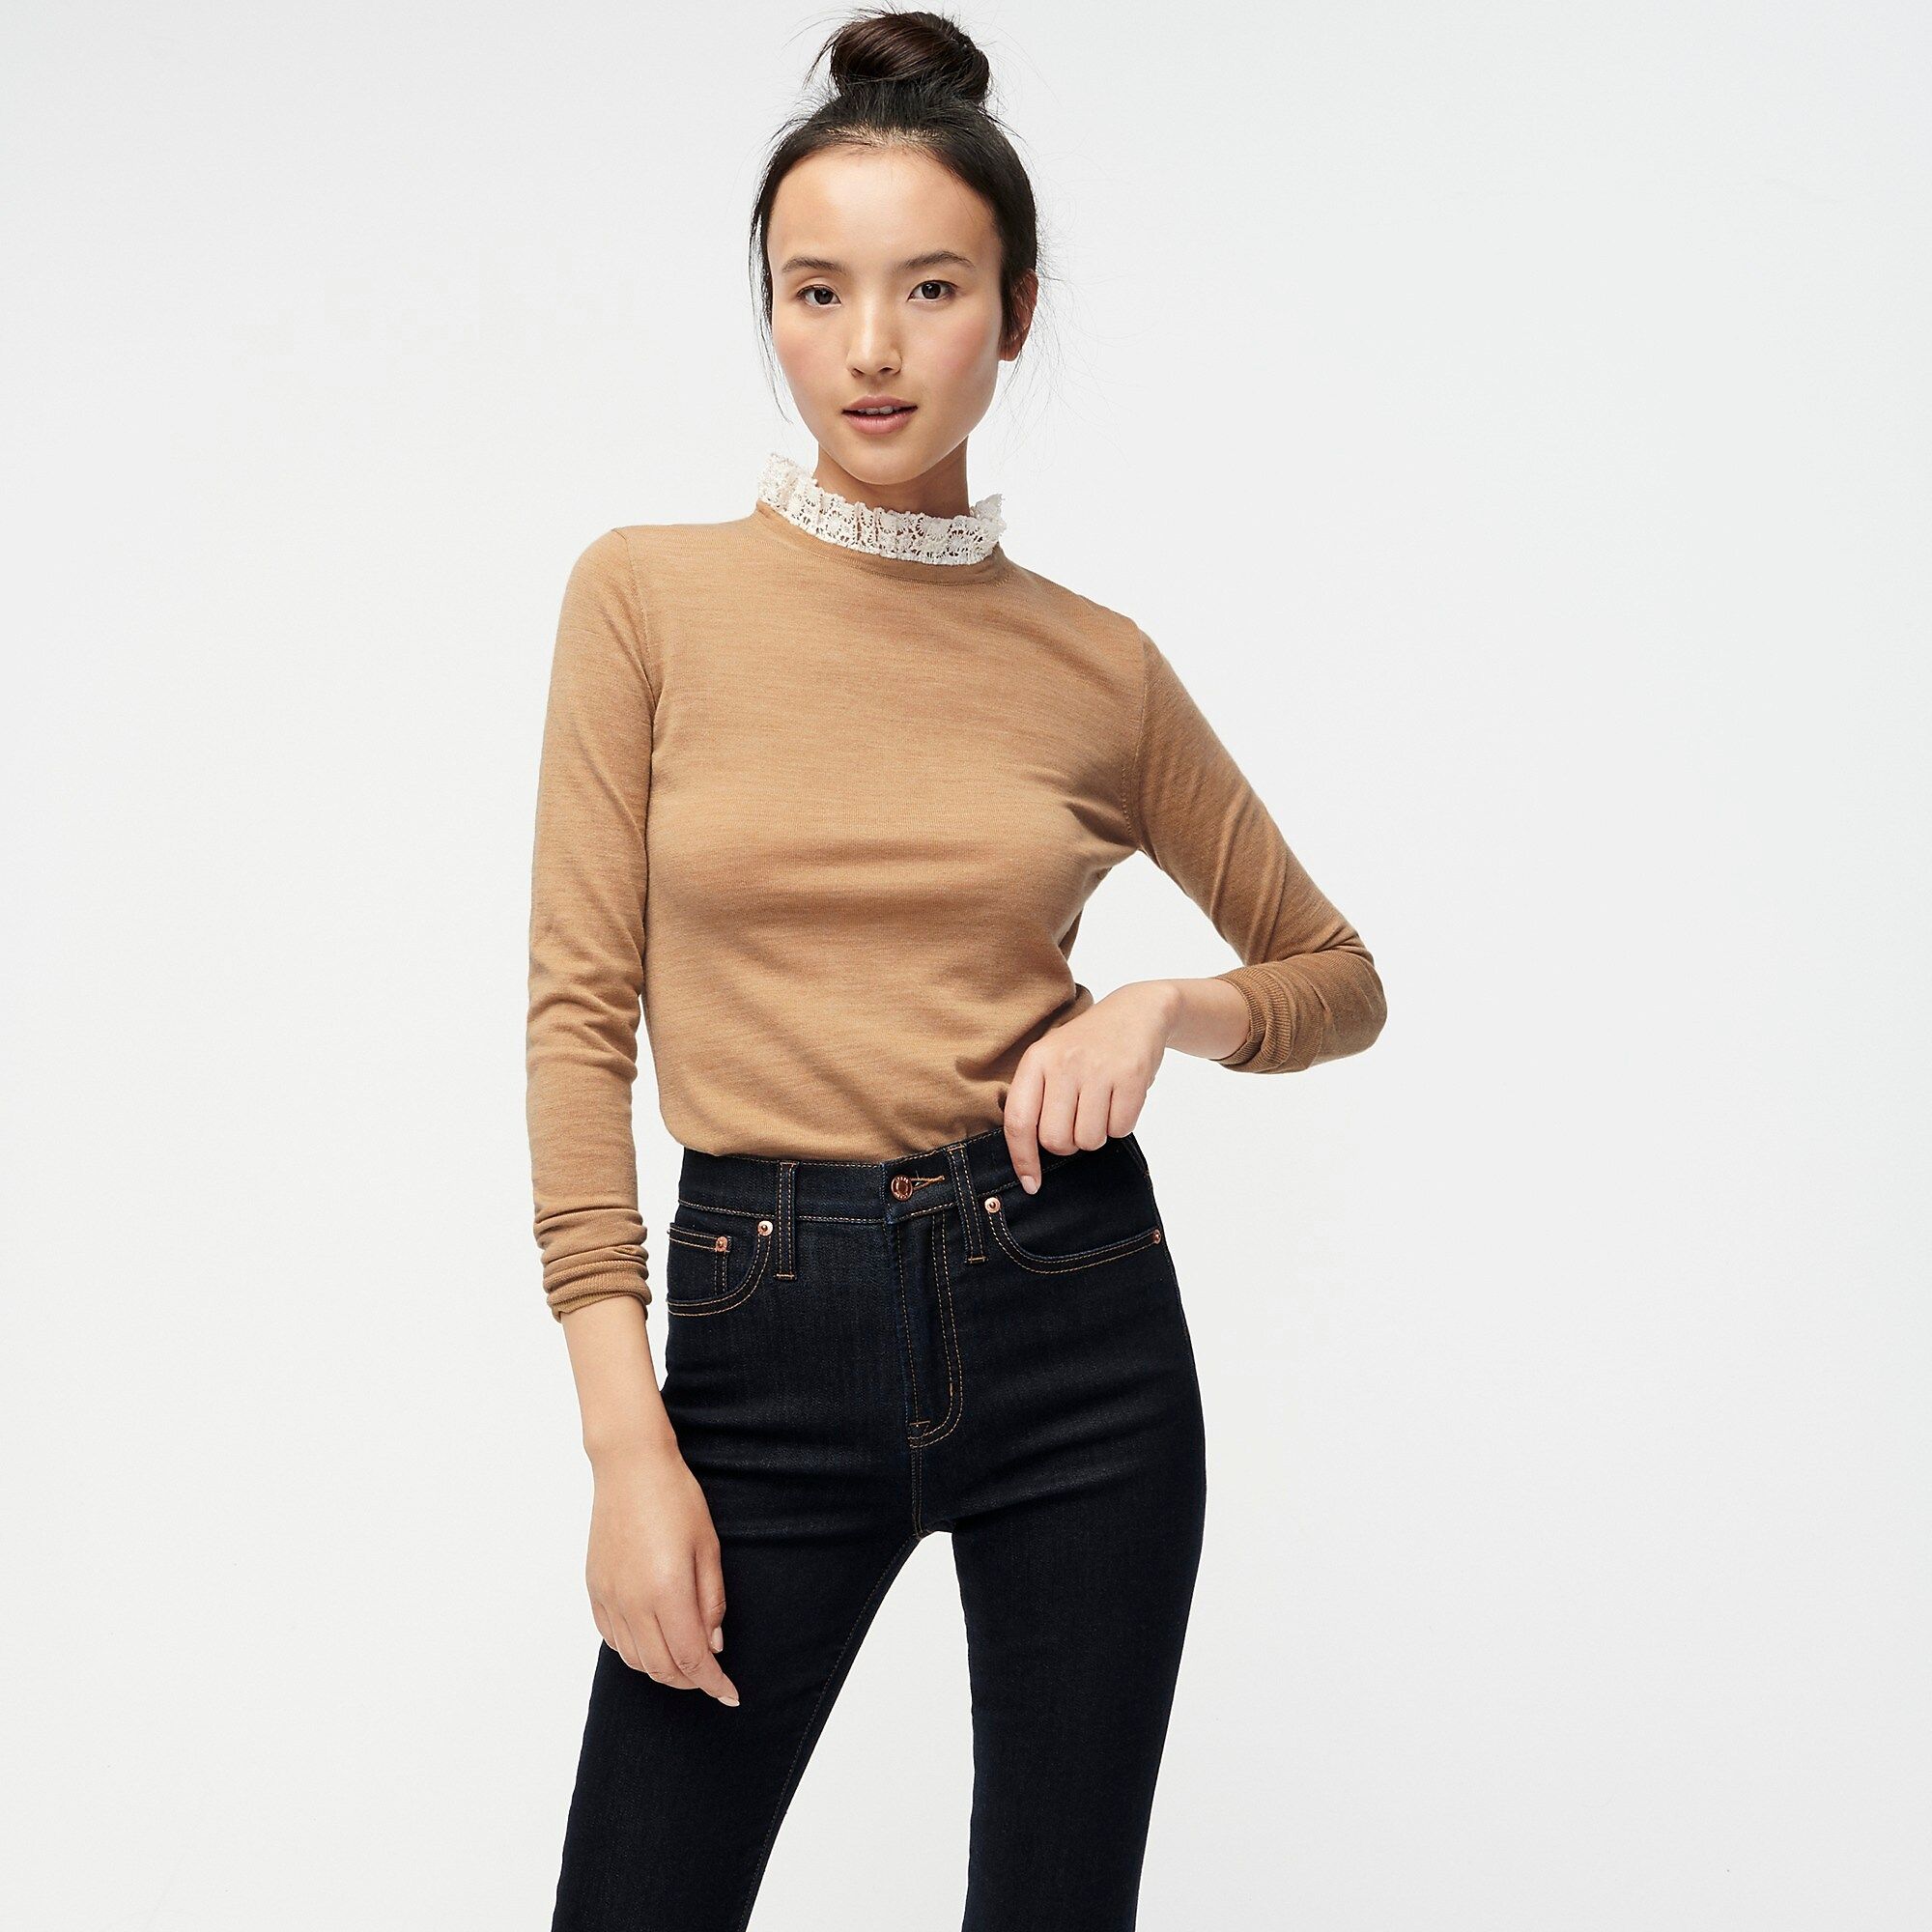 Tippi sweater with lace collar detail | J.Crew US